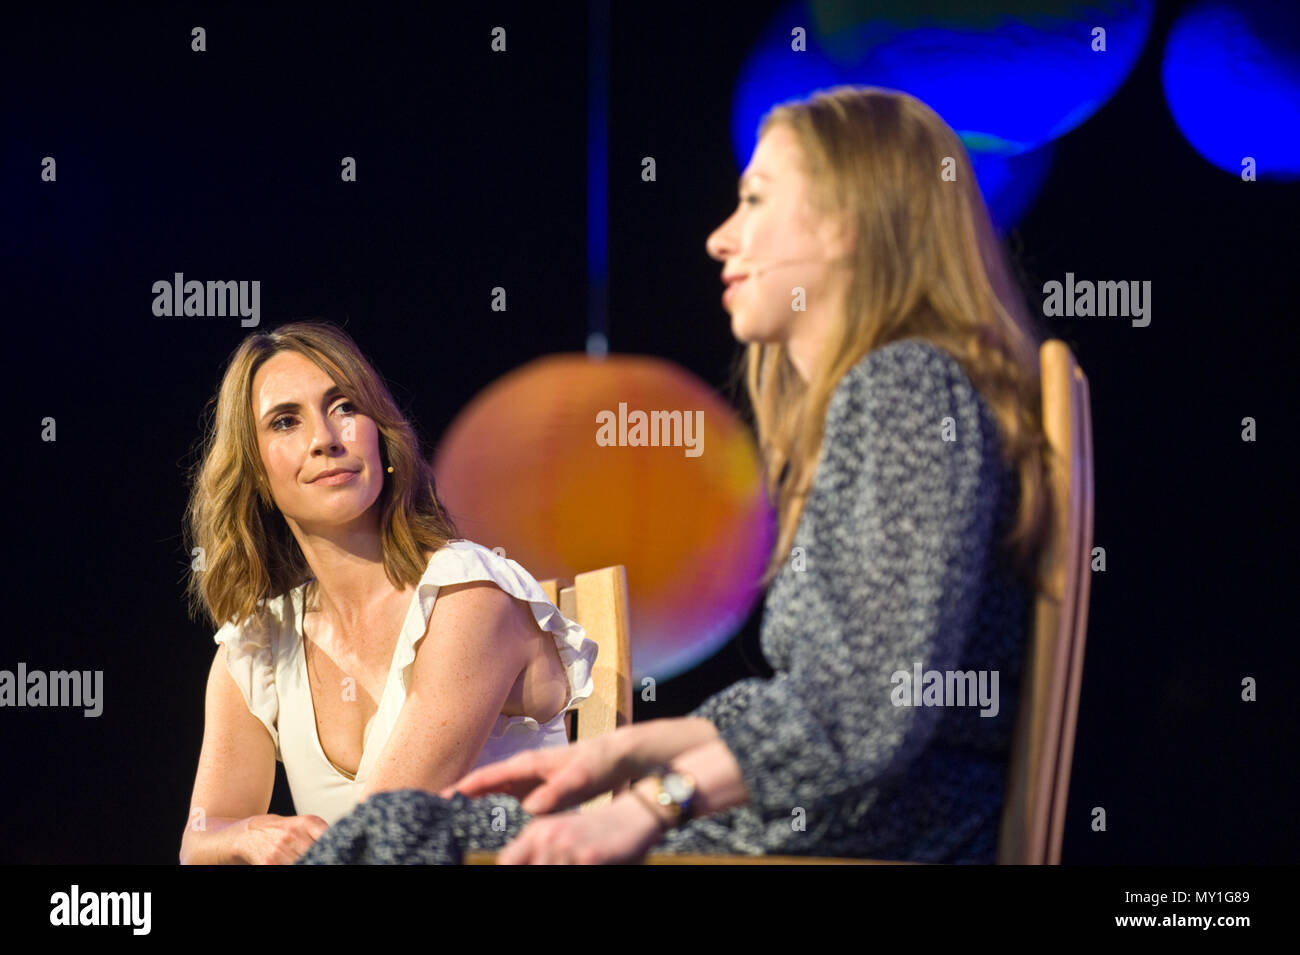 Chelsea Clinton & Alex Jones on stage at Hay Festival 2018 Hay on Wye Powys Wales UK Stock Photo